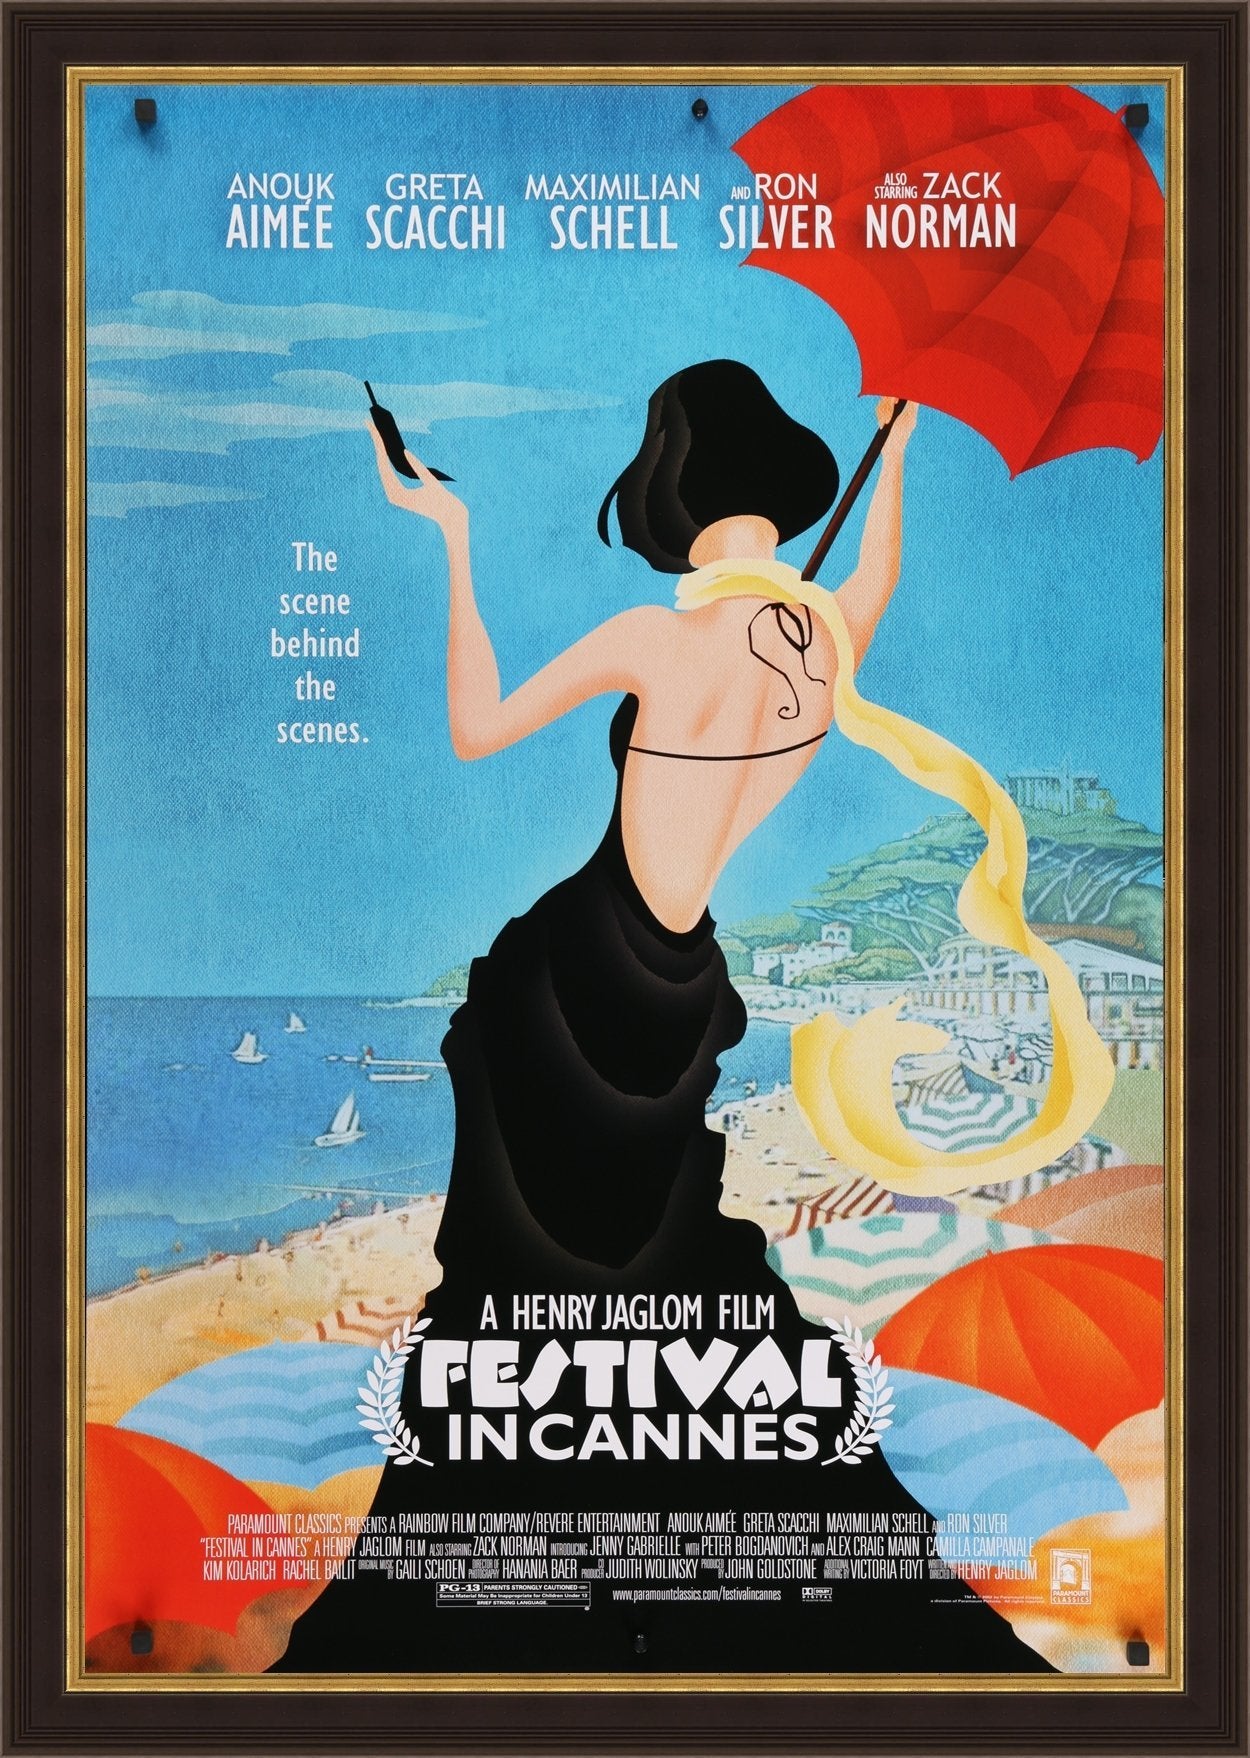 An original movie poster for the film Festival In Cannes